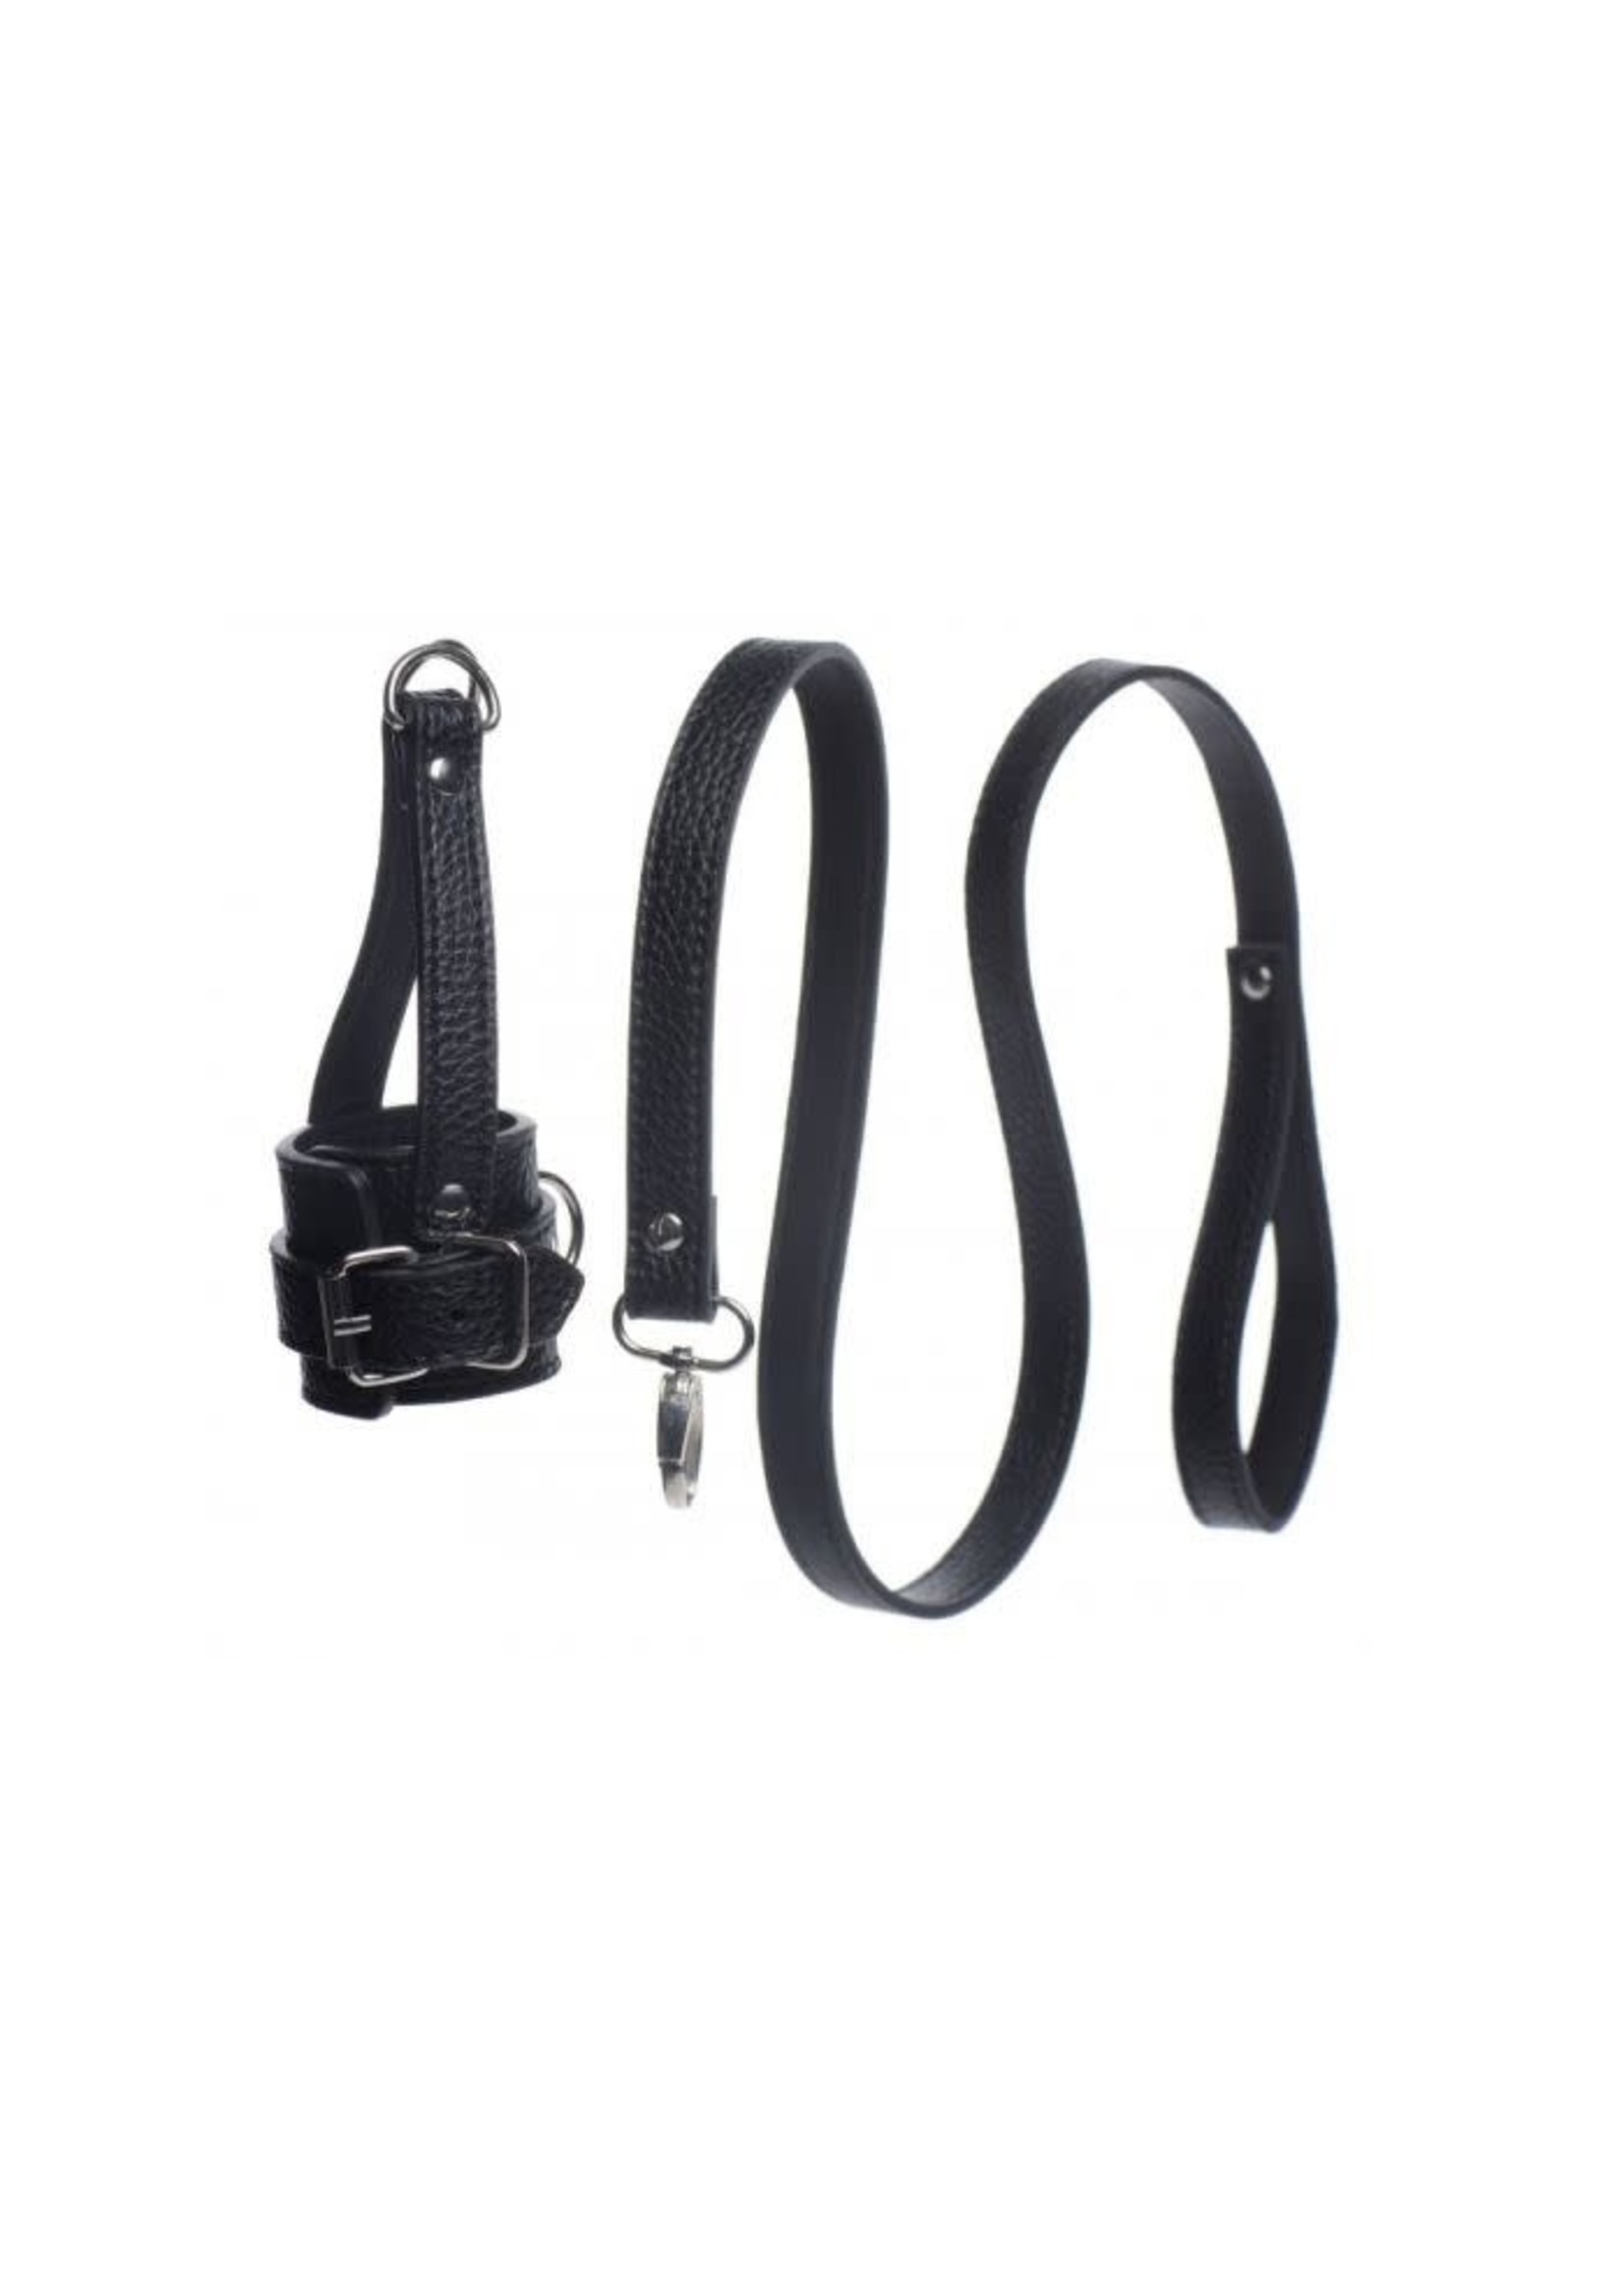 O-Products Ballstretcher With Leash